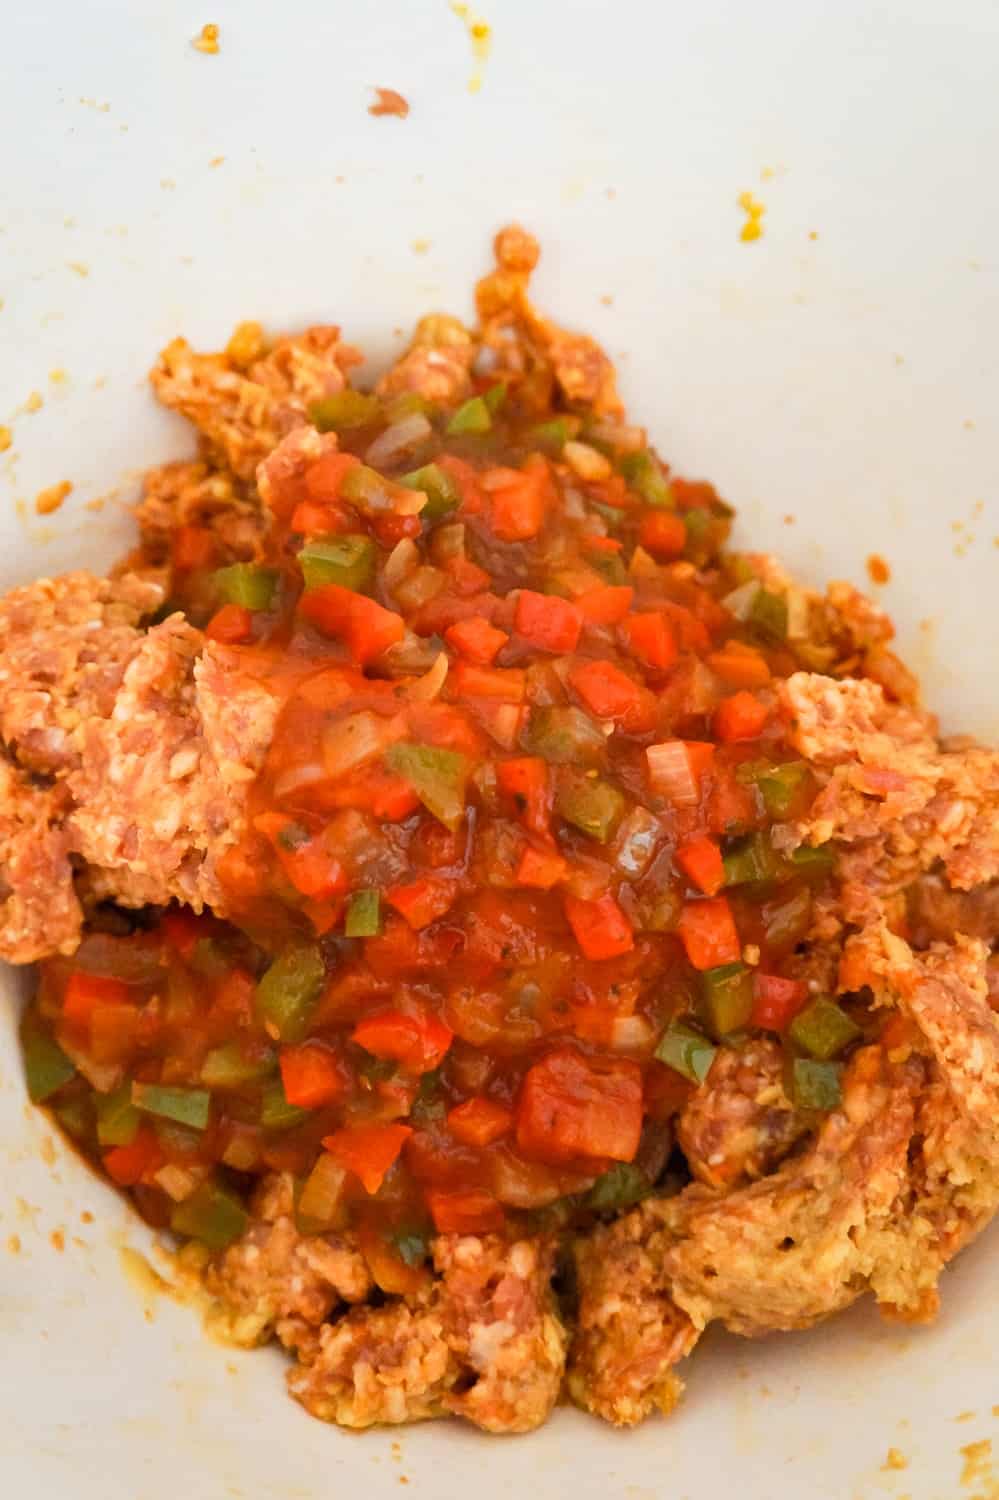 marinara sauce and diced peppers on top of sausage meat in a mixing bowl